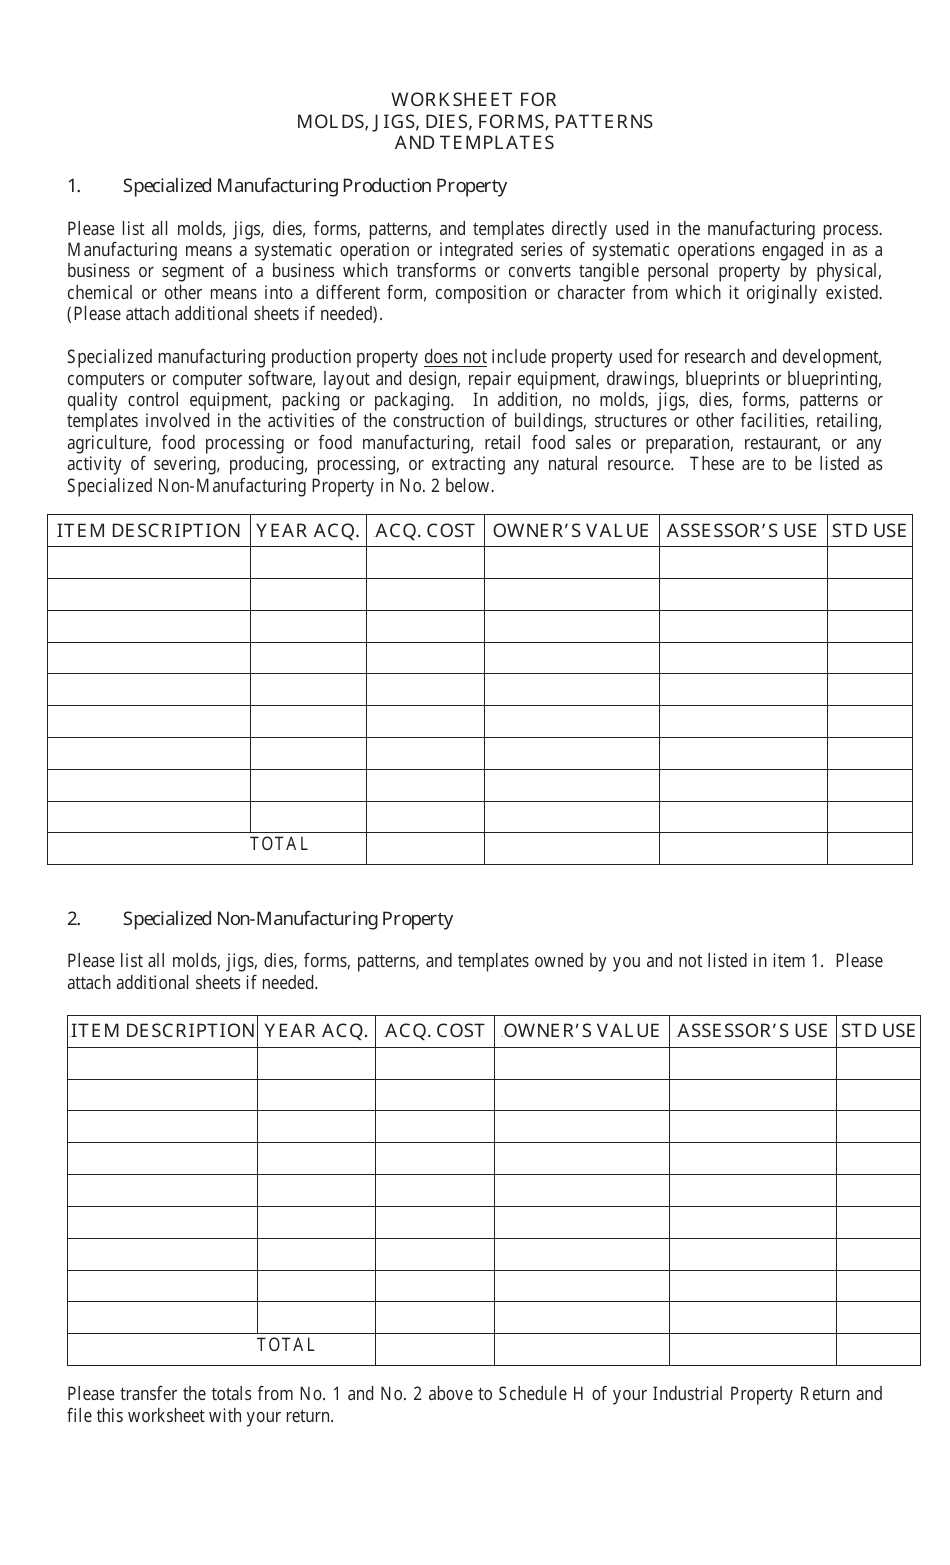 Worksheet for Molds, Jigs, Dies, Forms, Patterns and Templates - West Virginia, Page 1